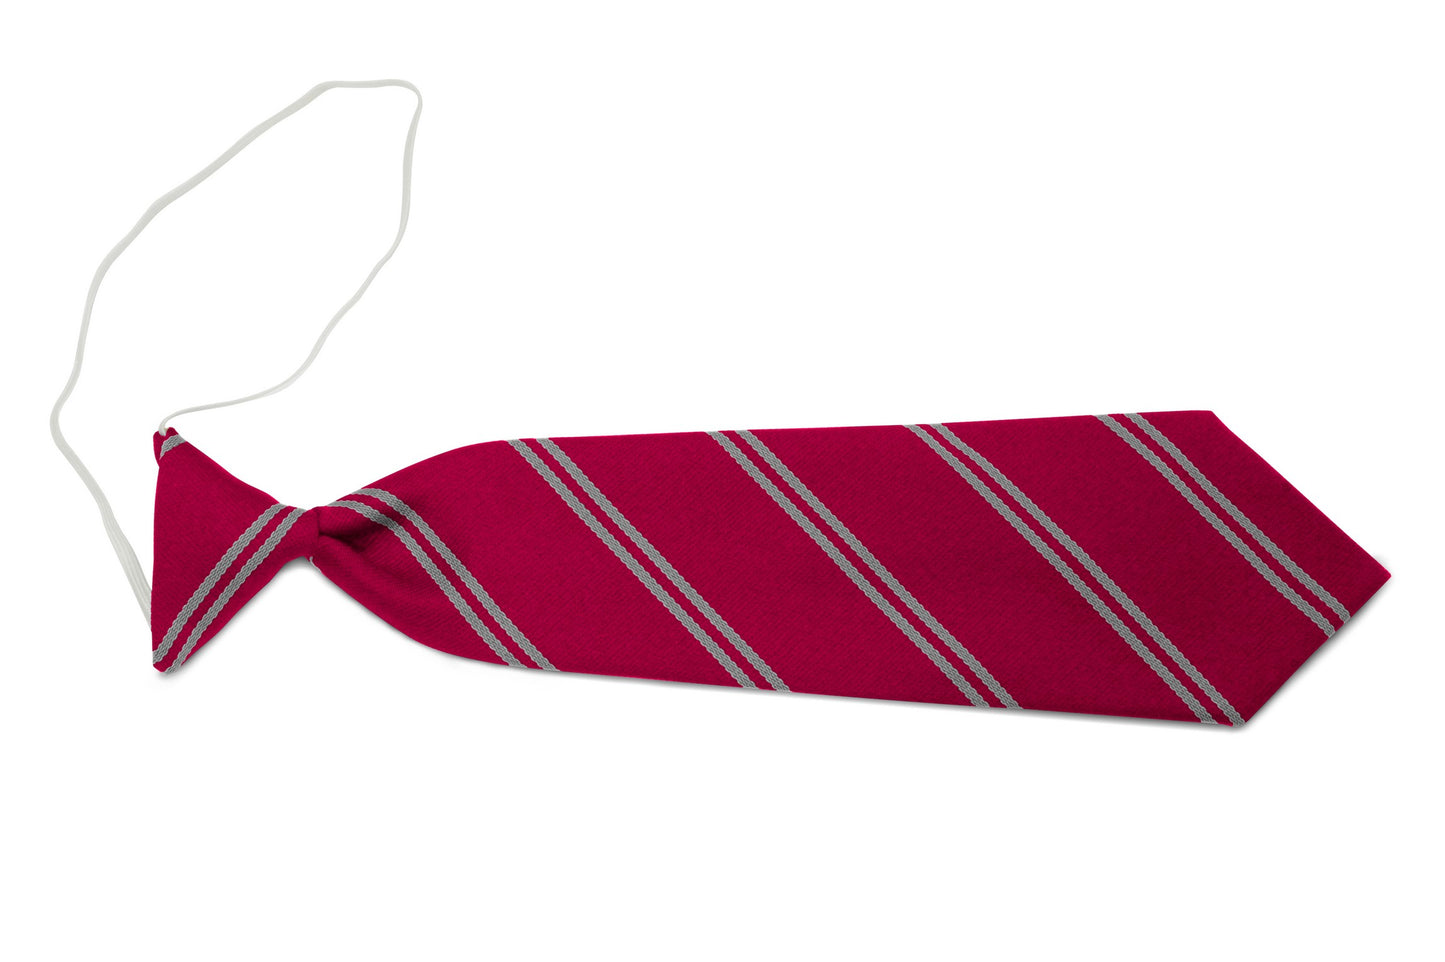 Stock Design Ties Red with double Grey Stripe (5403-9212) - Lynendo Trade Store